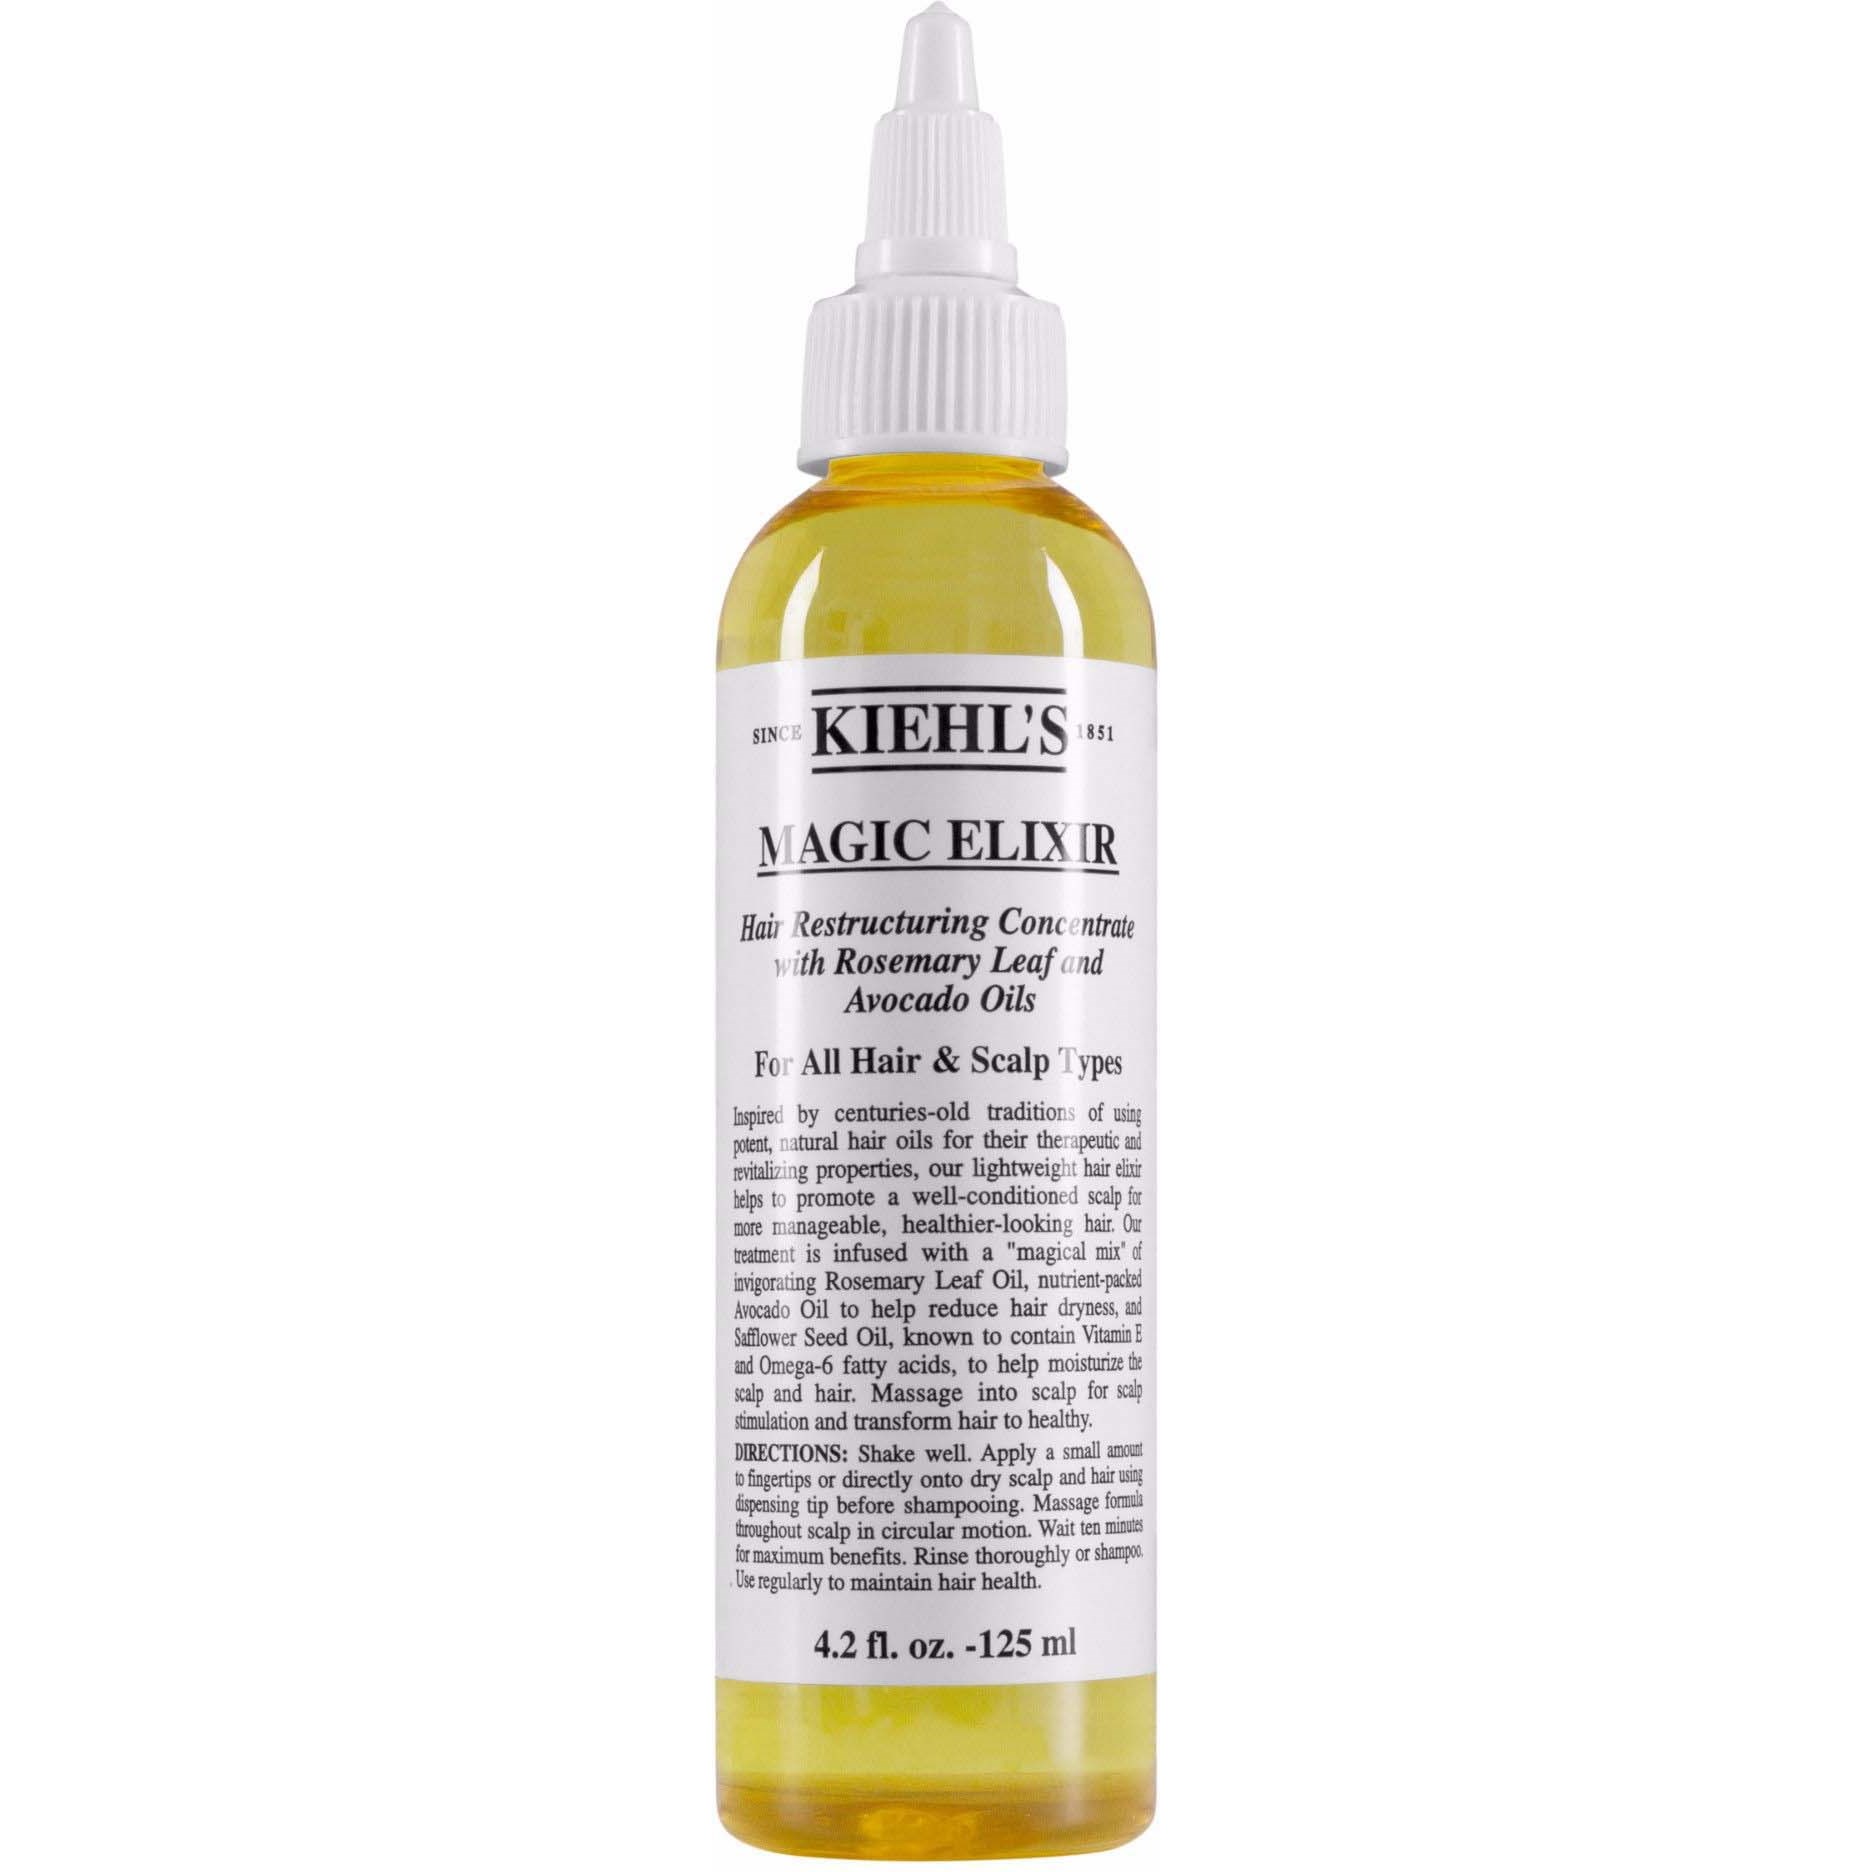 Kiehls Magic Elixir Hair Restructuring Concentrate 125 ml